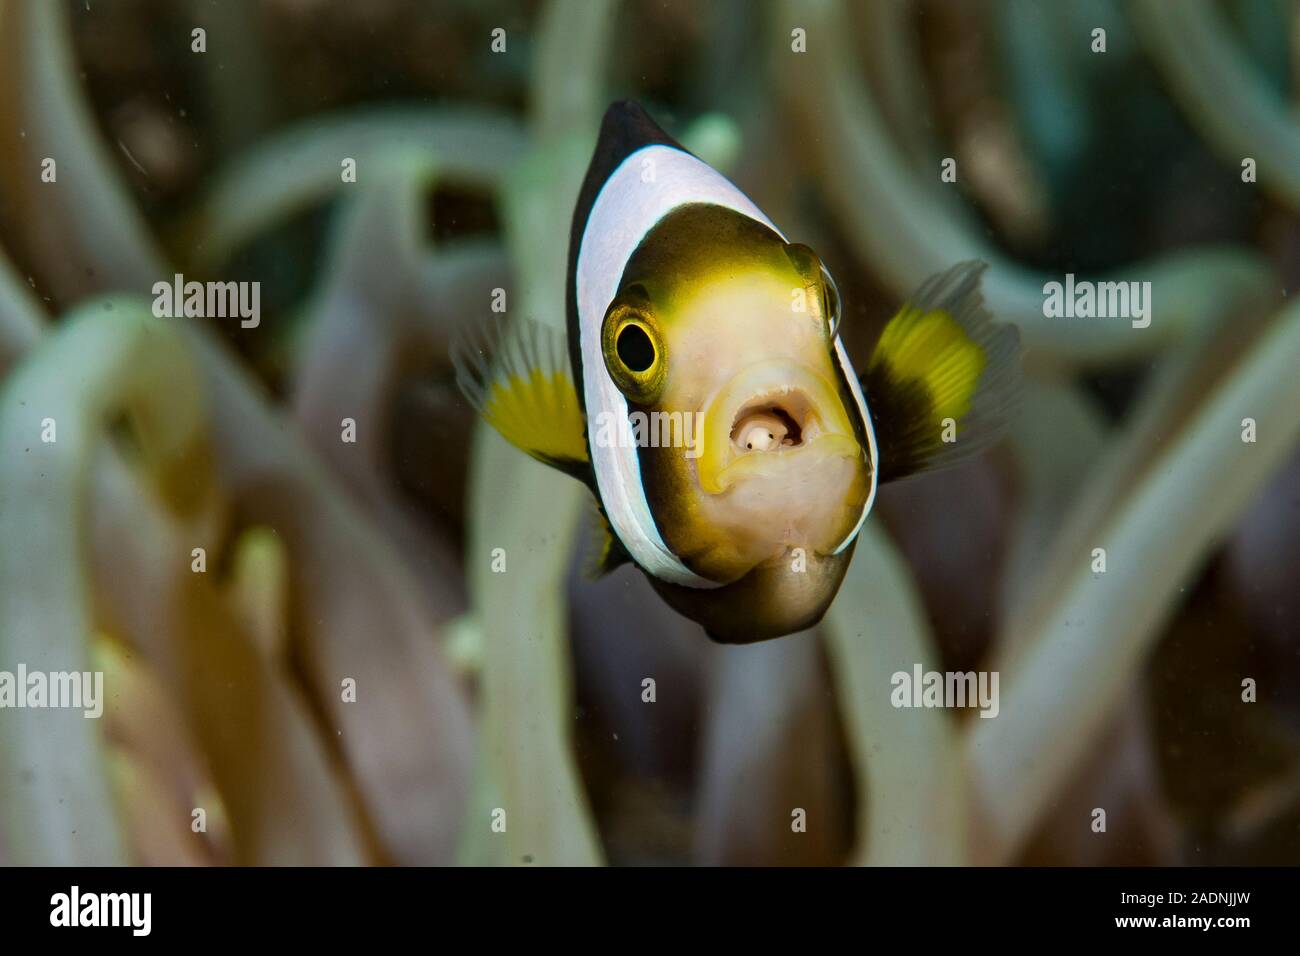 Panda Anemonefish Amphiprion polymnus, with mouth parasite Stock Photo